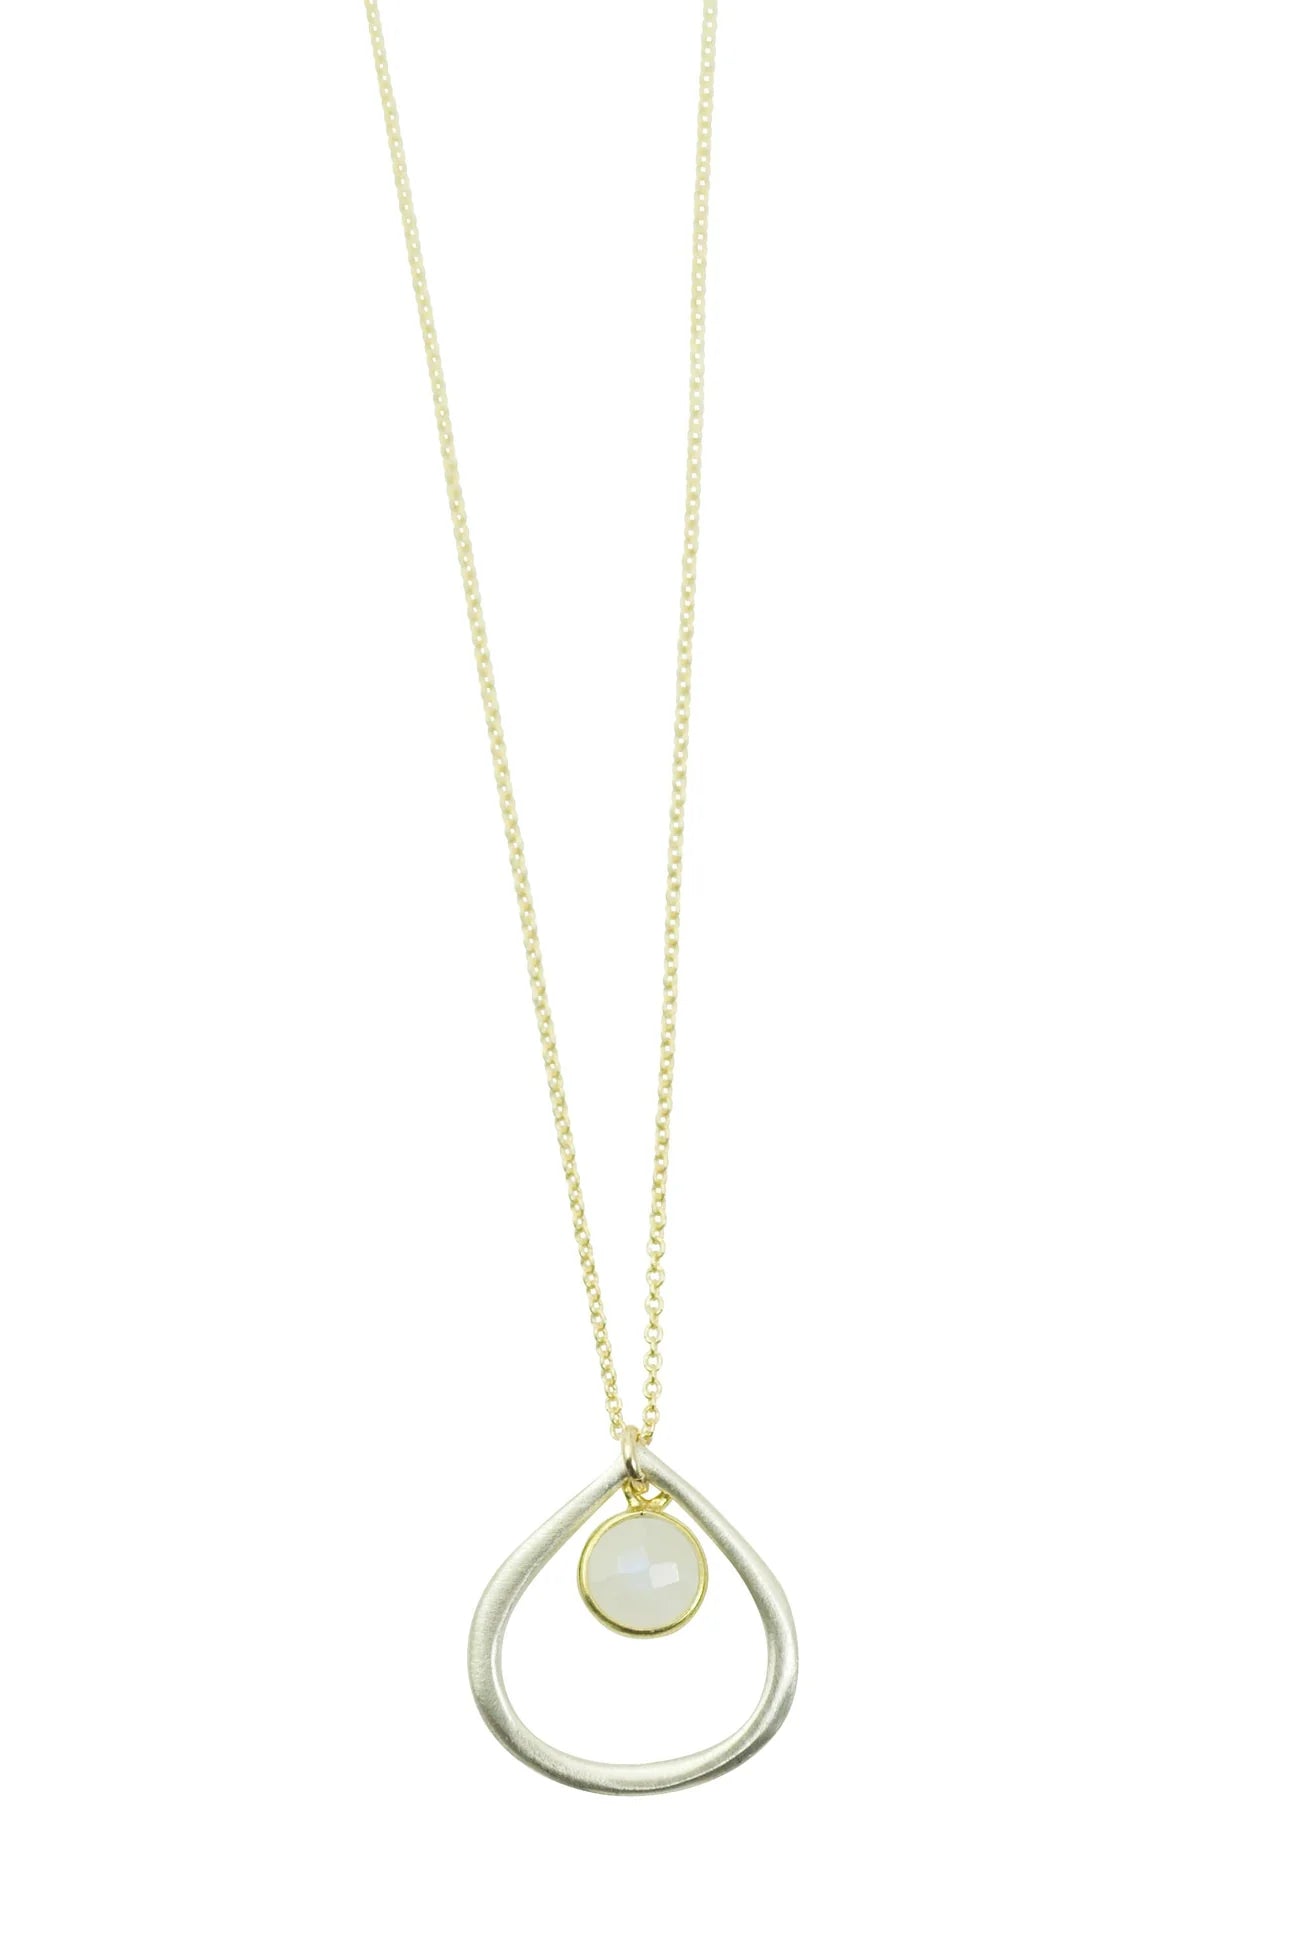 Small Open Drop w. Moonstone Necklace - The Riviera Towel Company